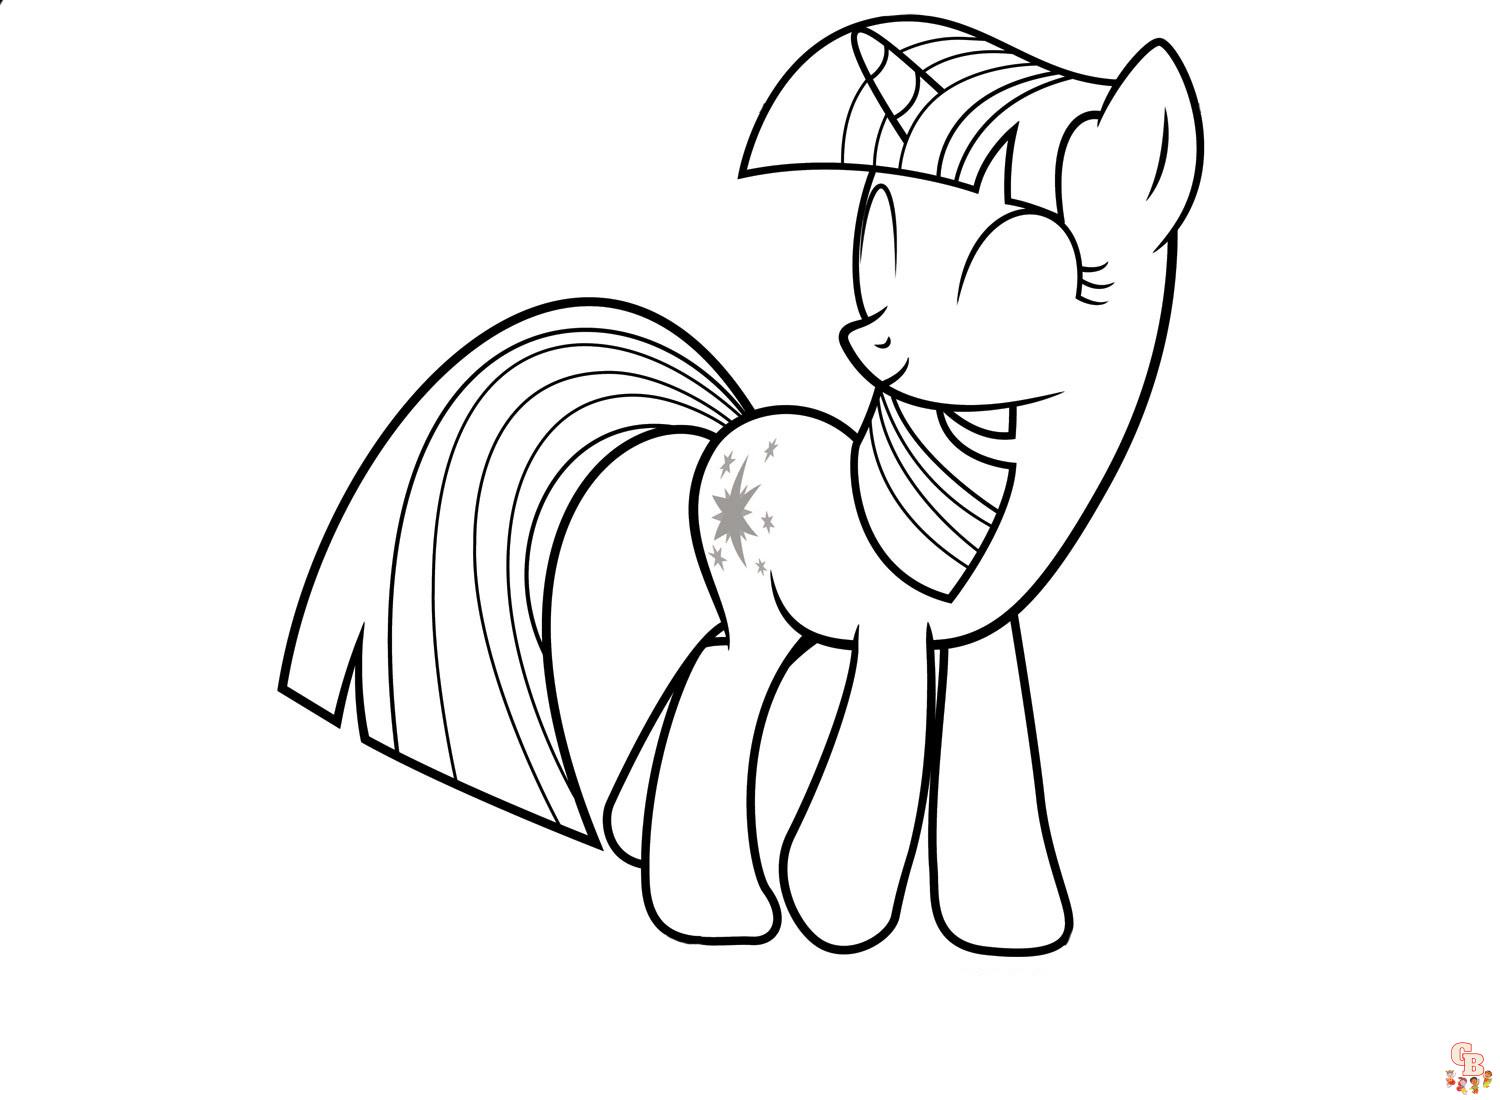 Cute Twilight Sparkle coloring pages easy